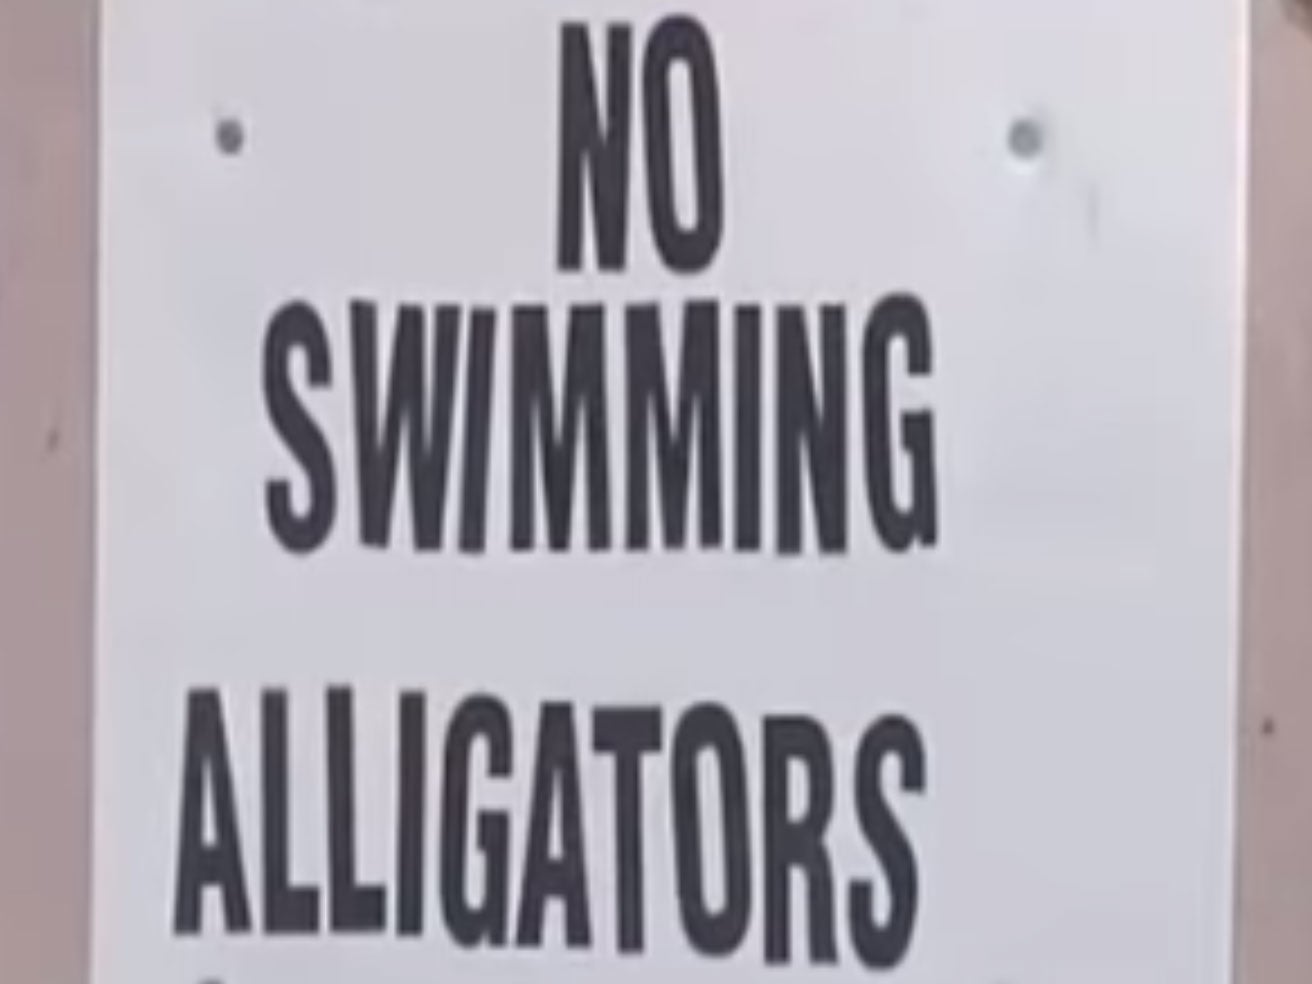 Man killed by alligator after mocking the threat of the animal and ignoring no swimming signs in Texas